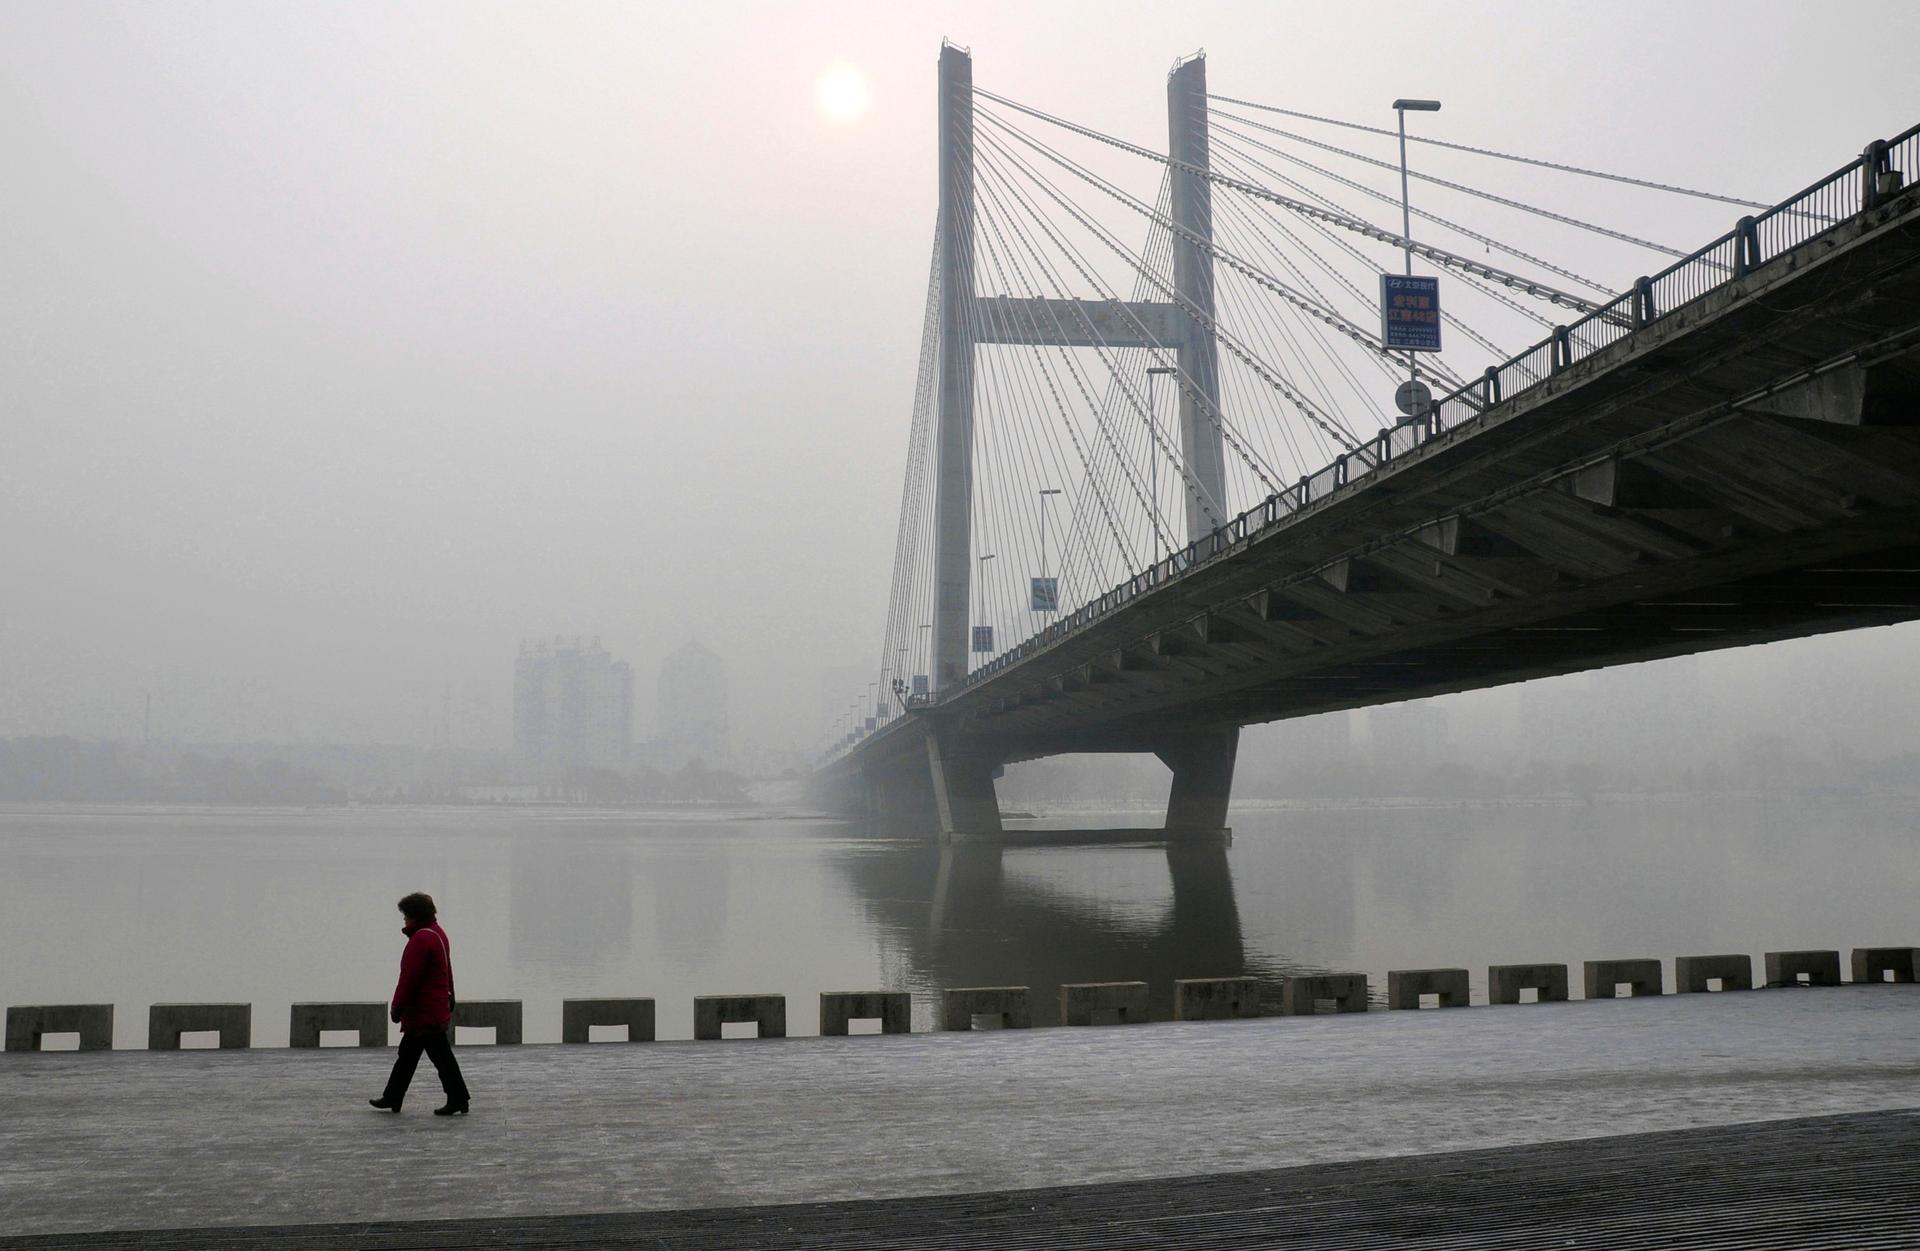 A resident walks along a street on the banks of the Songhua River near a highway bridge on a hazy day in Jilin, Jilin province, on February 25, 2014